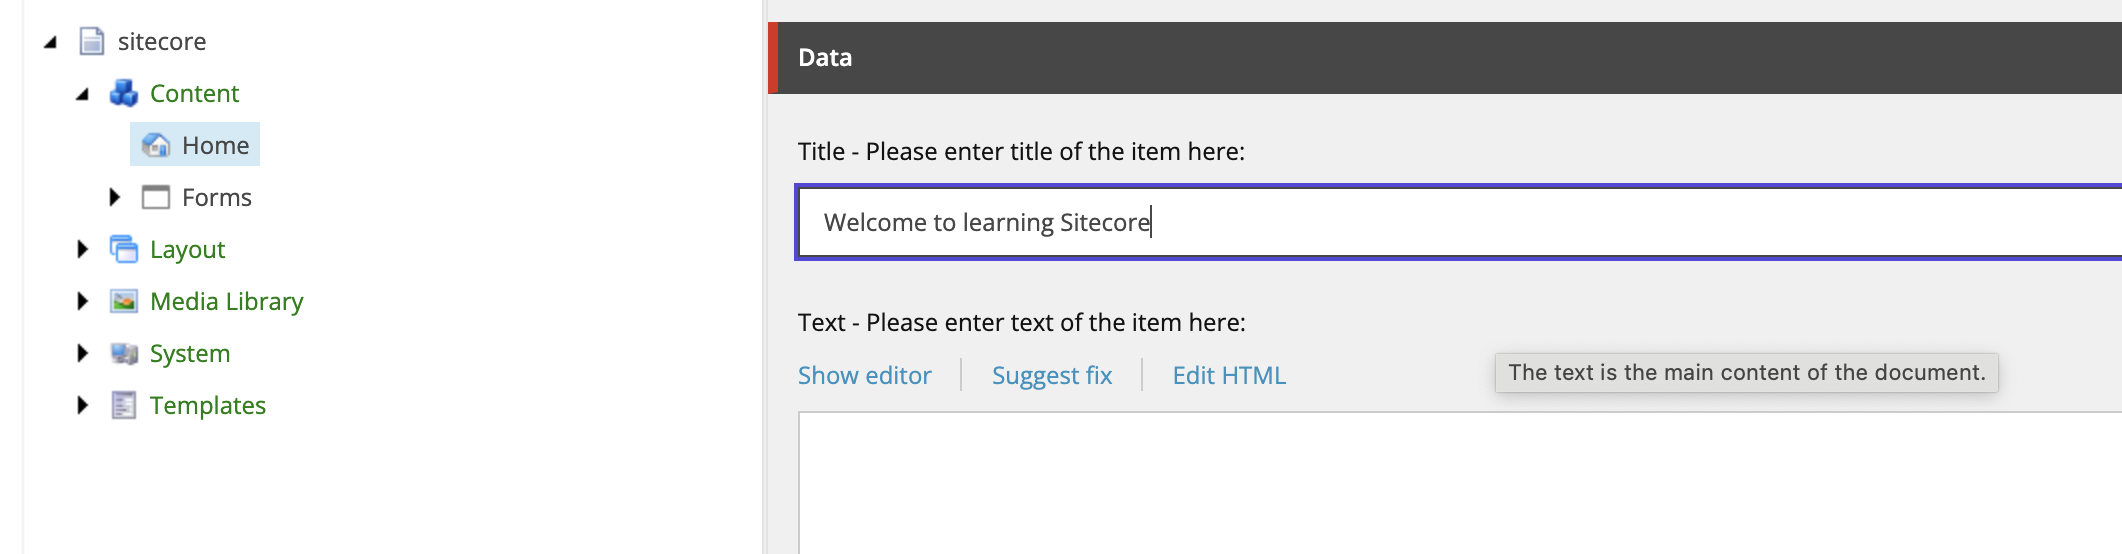 Screenshot from Sitecore depicting the dialog to create new content in your selected language